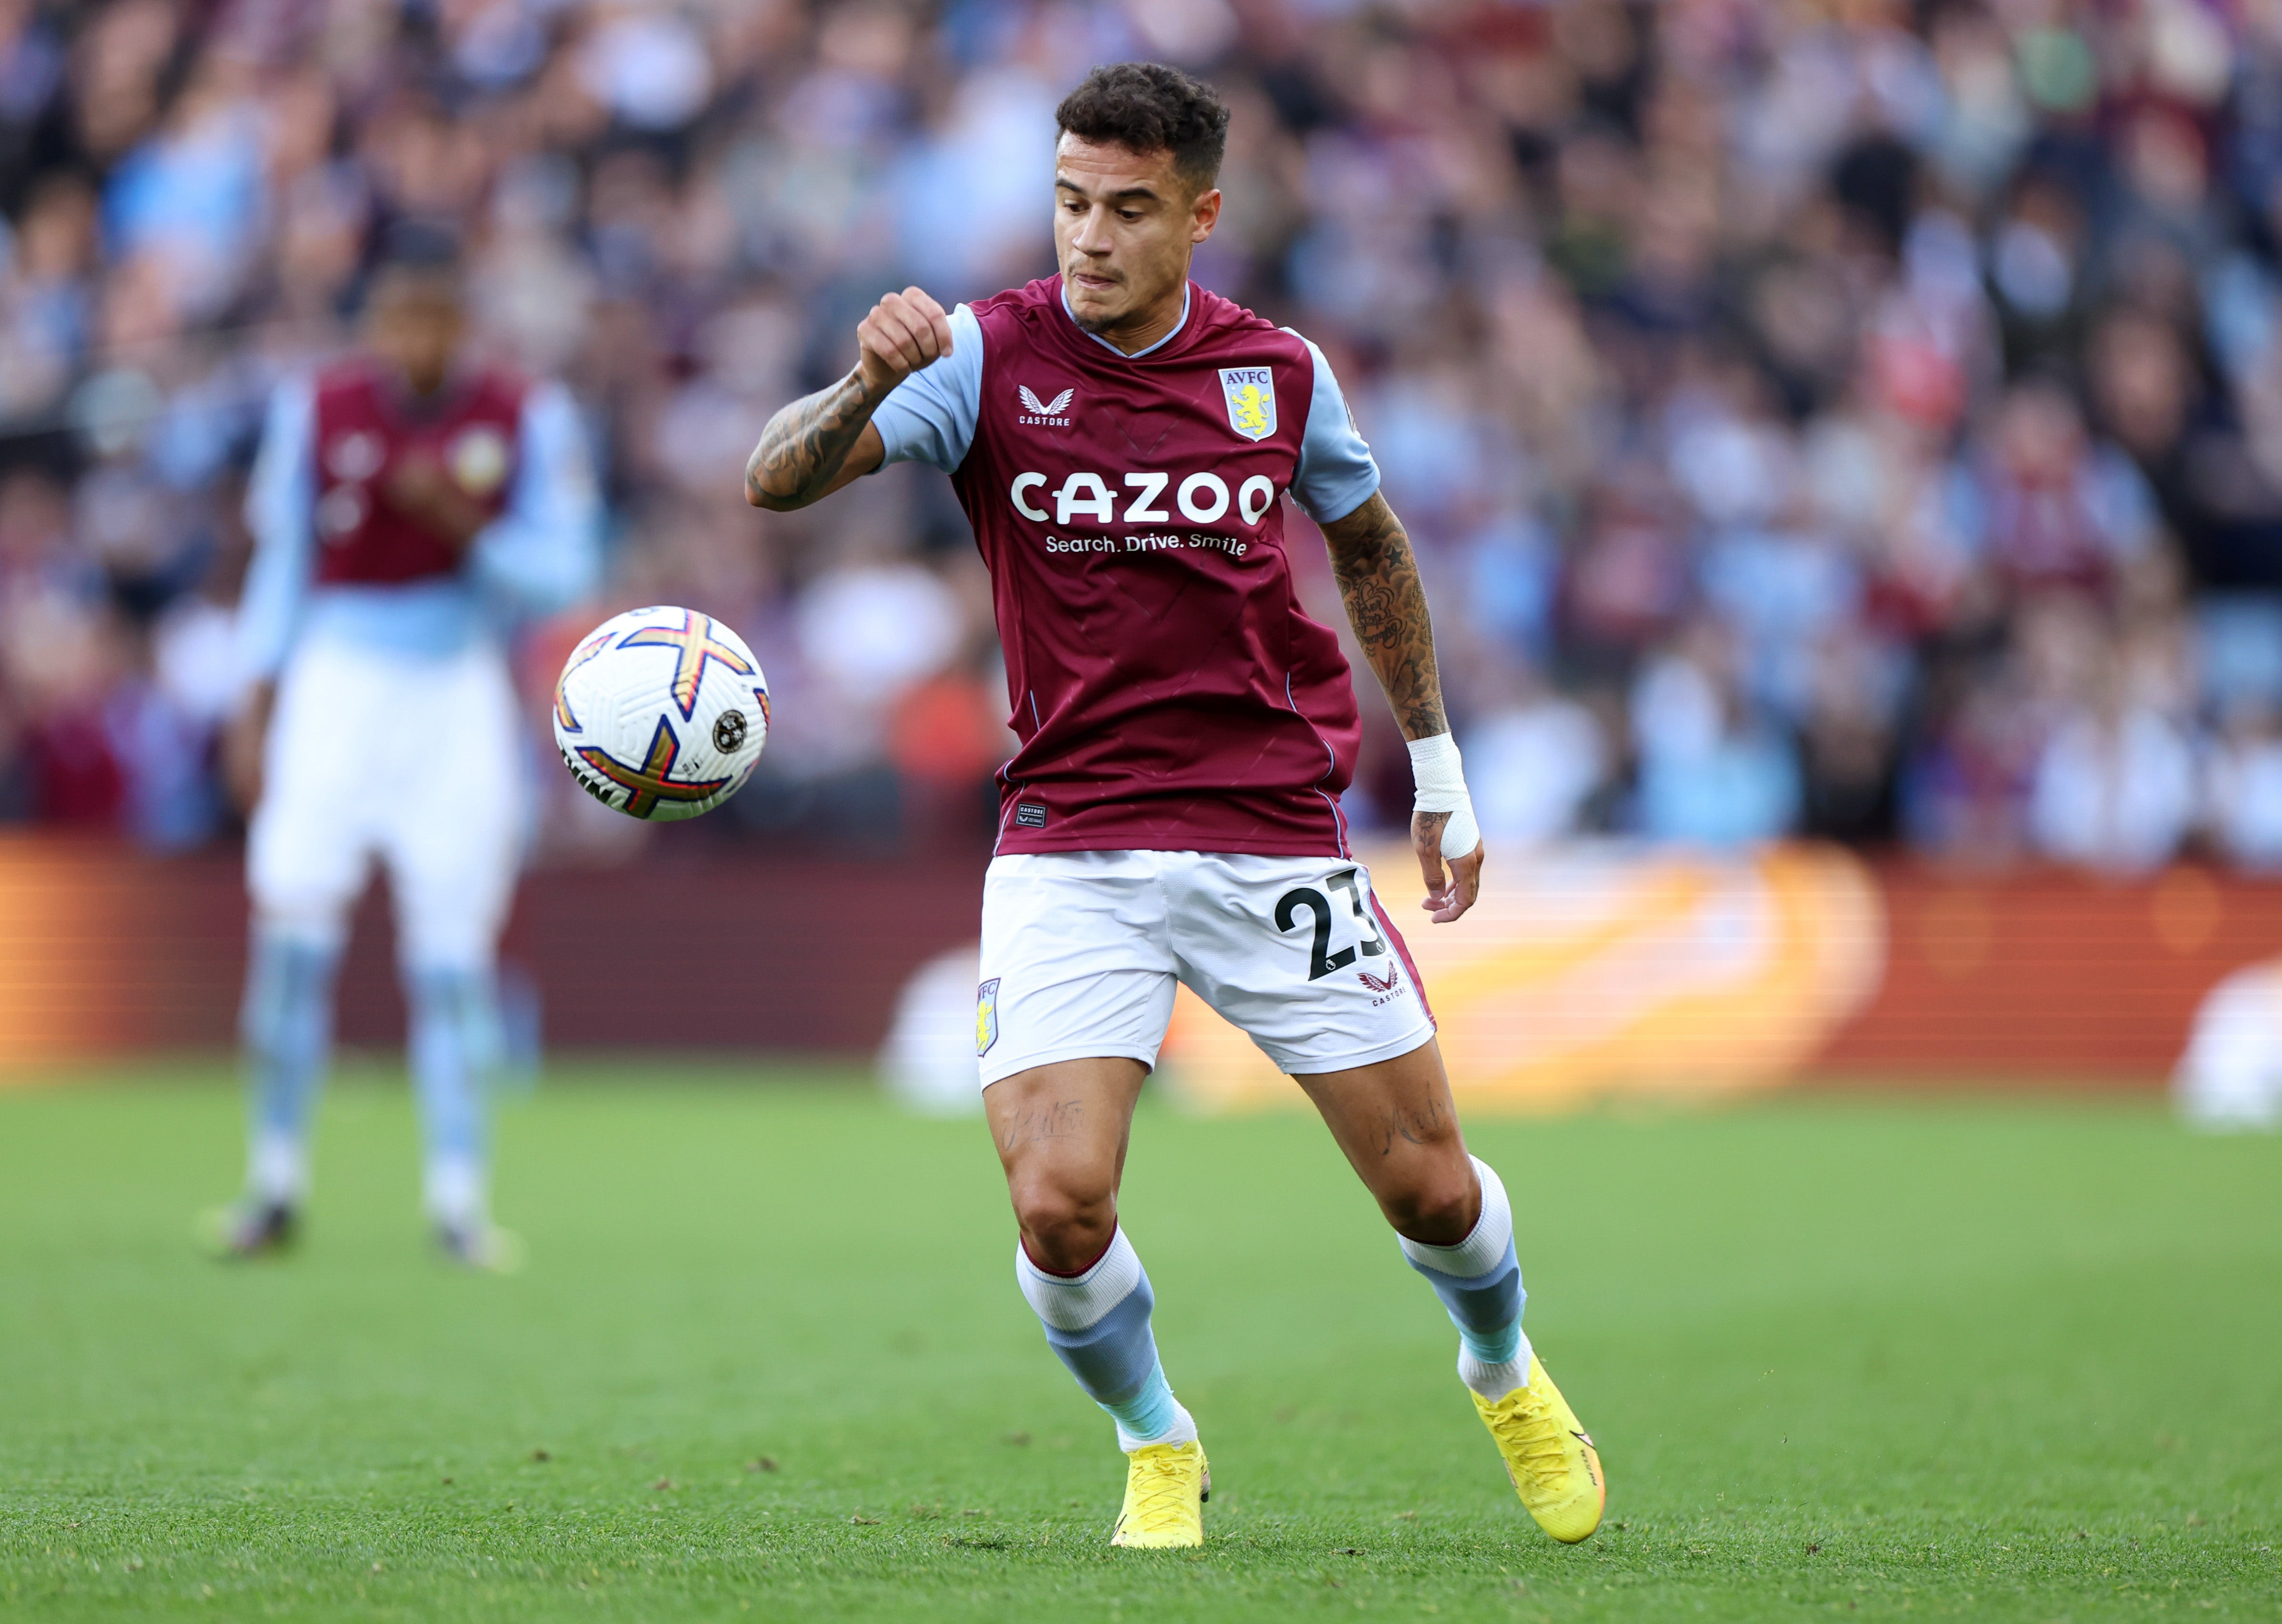 Philippe Coutinho of Aston Villa in action against Brentford